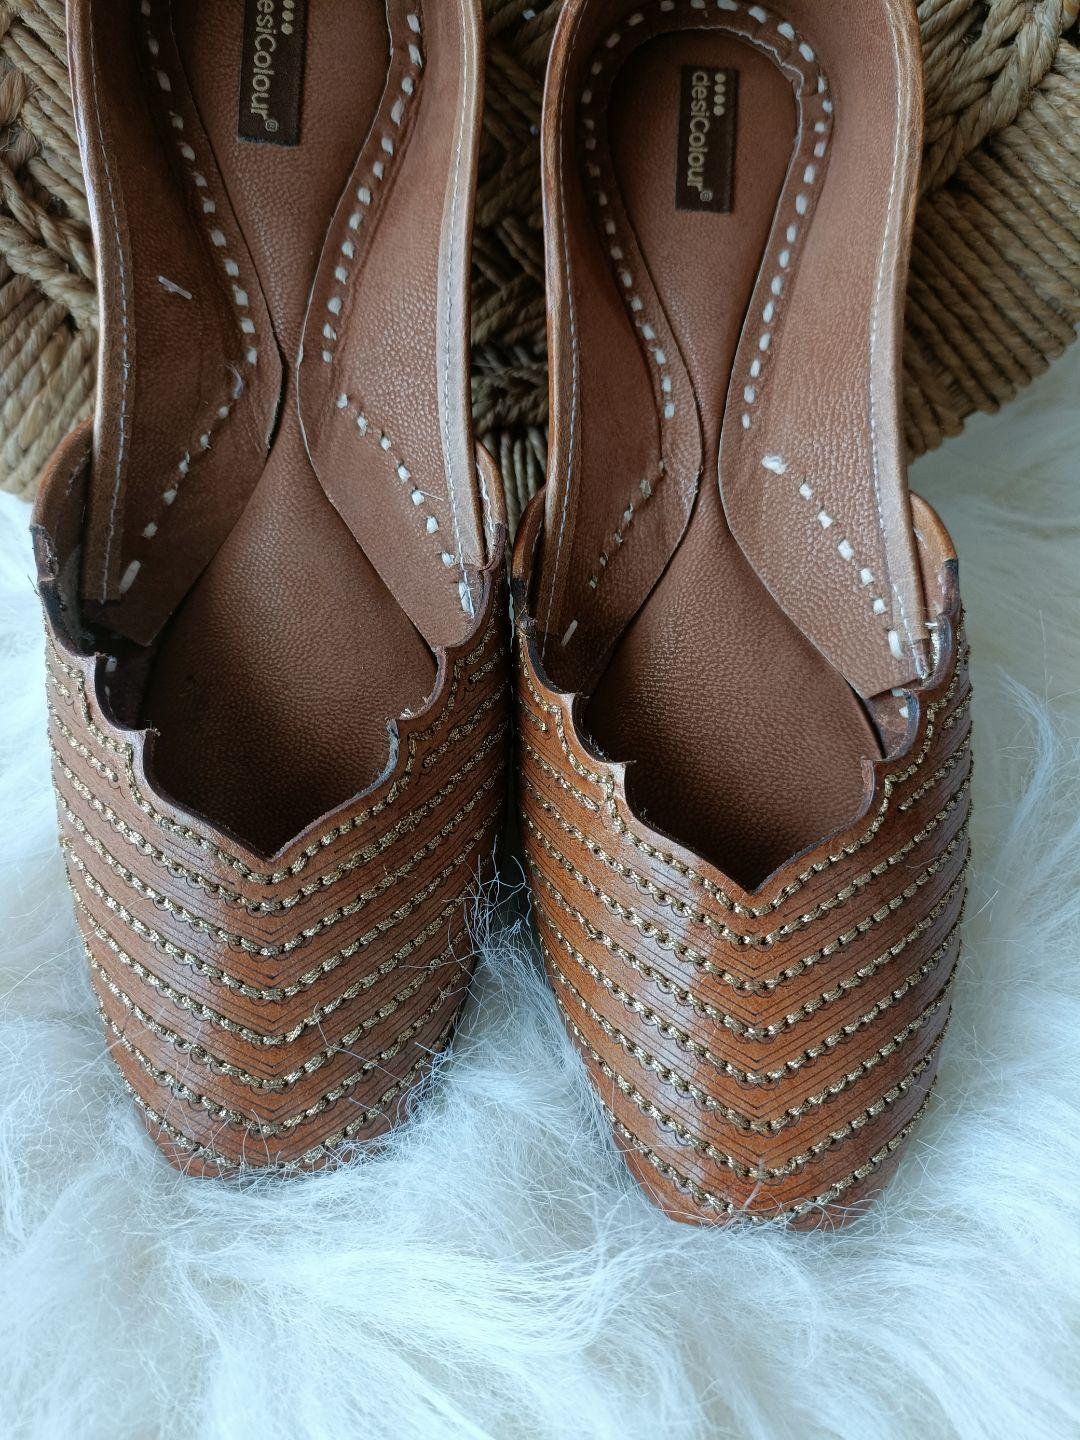 DESI COLOUR Women Brown Embellished Leather Handcrafted Mojaris